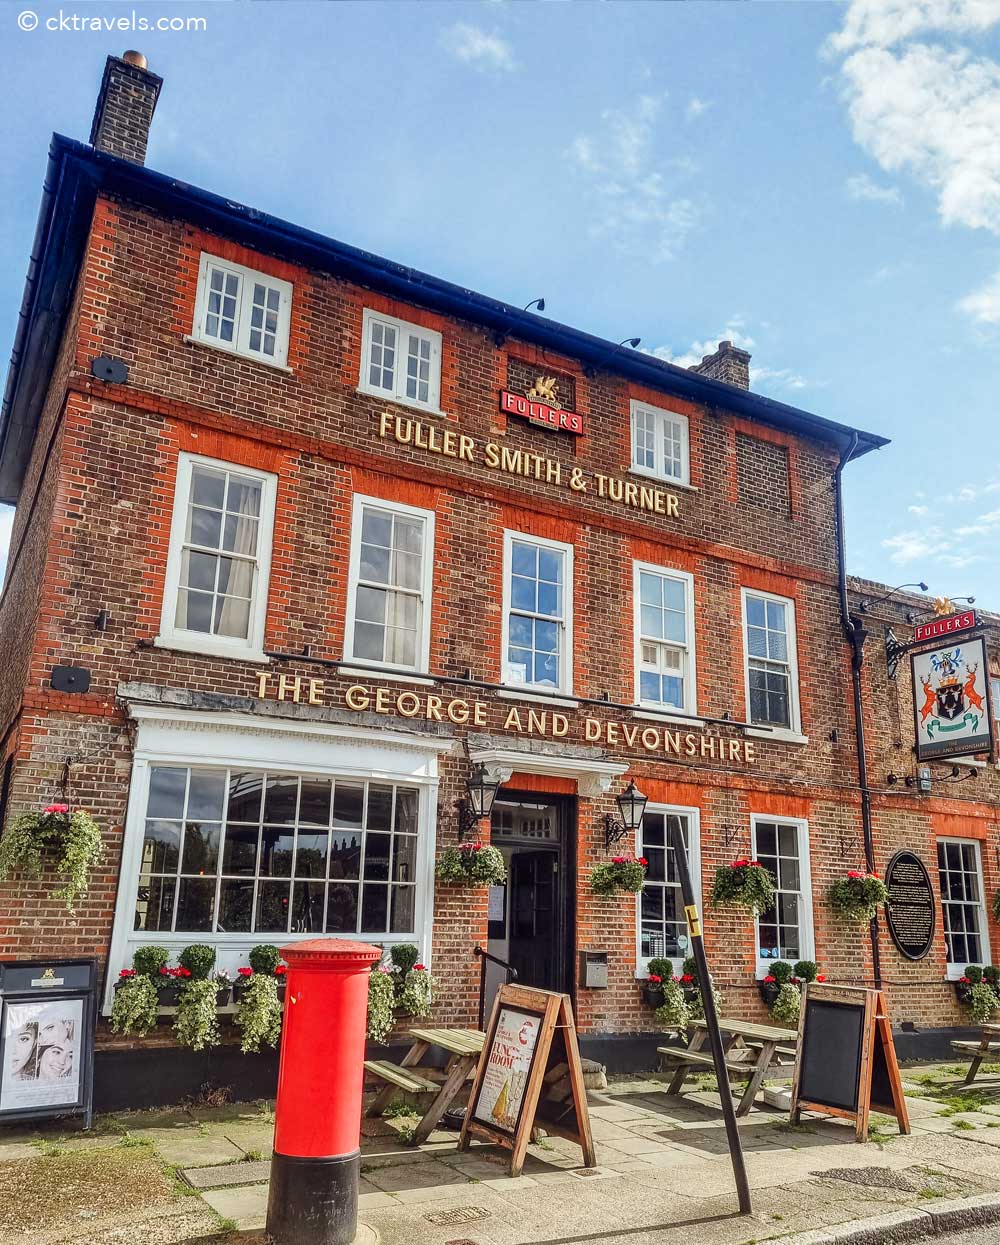 The George and Devonshire fullers pub Chiswick